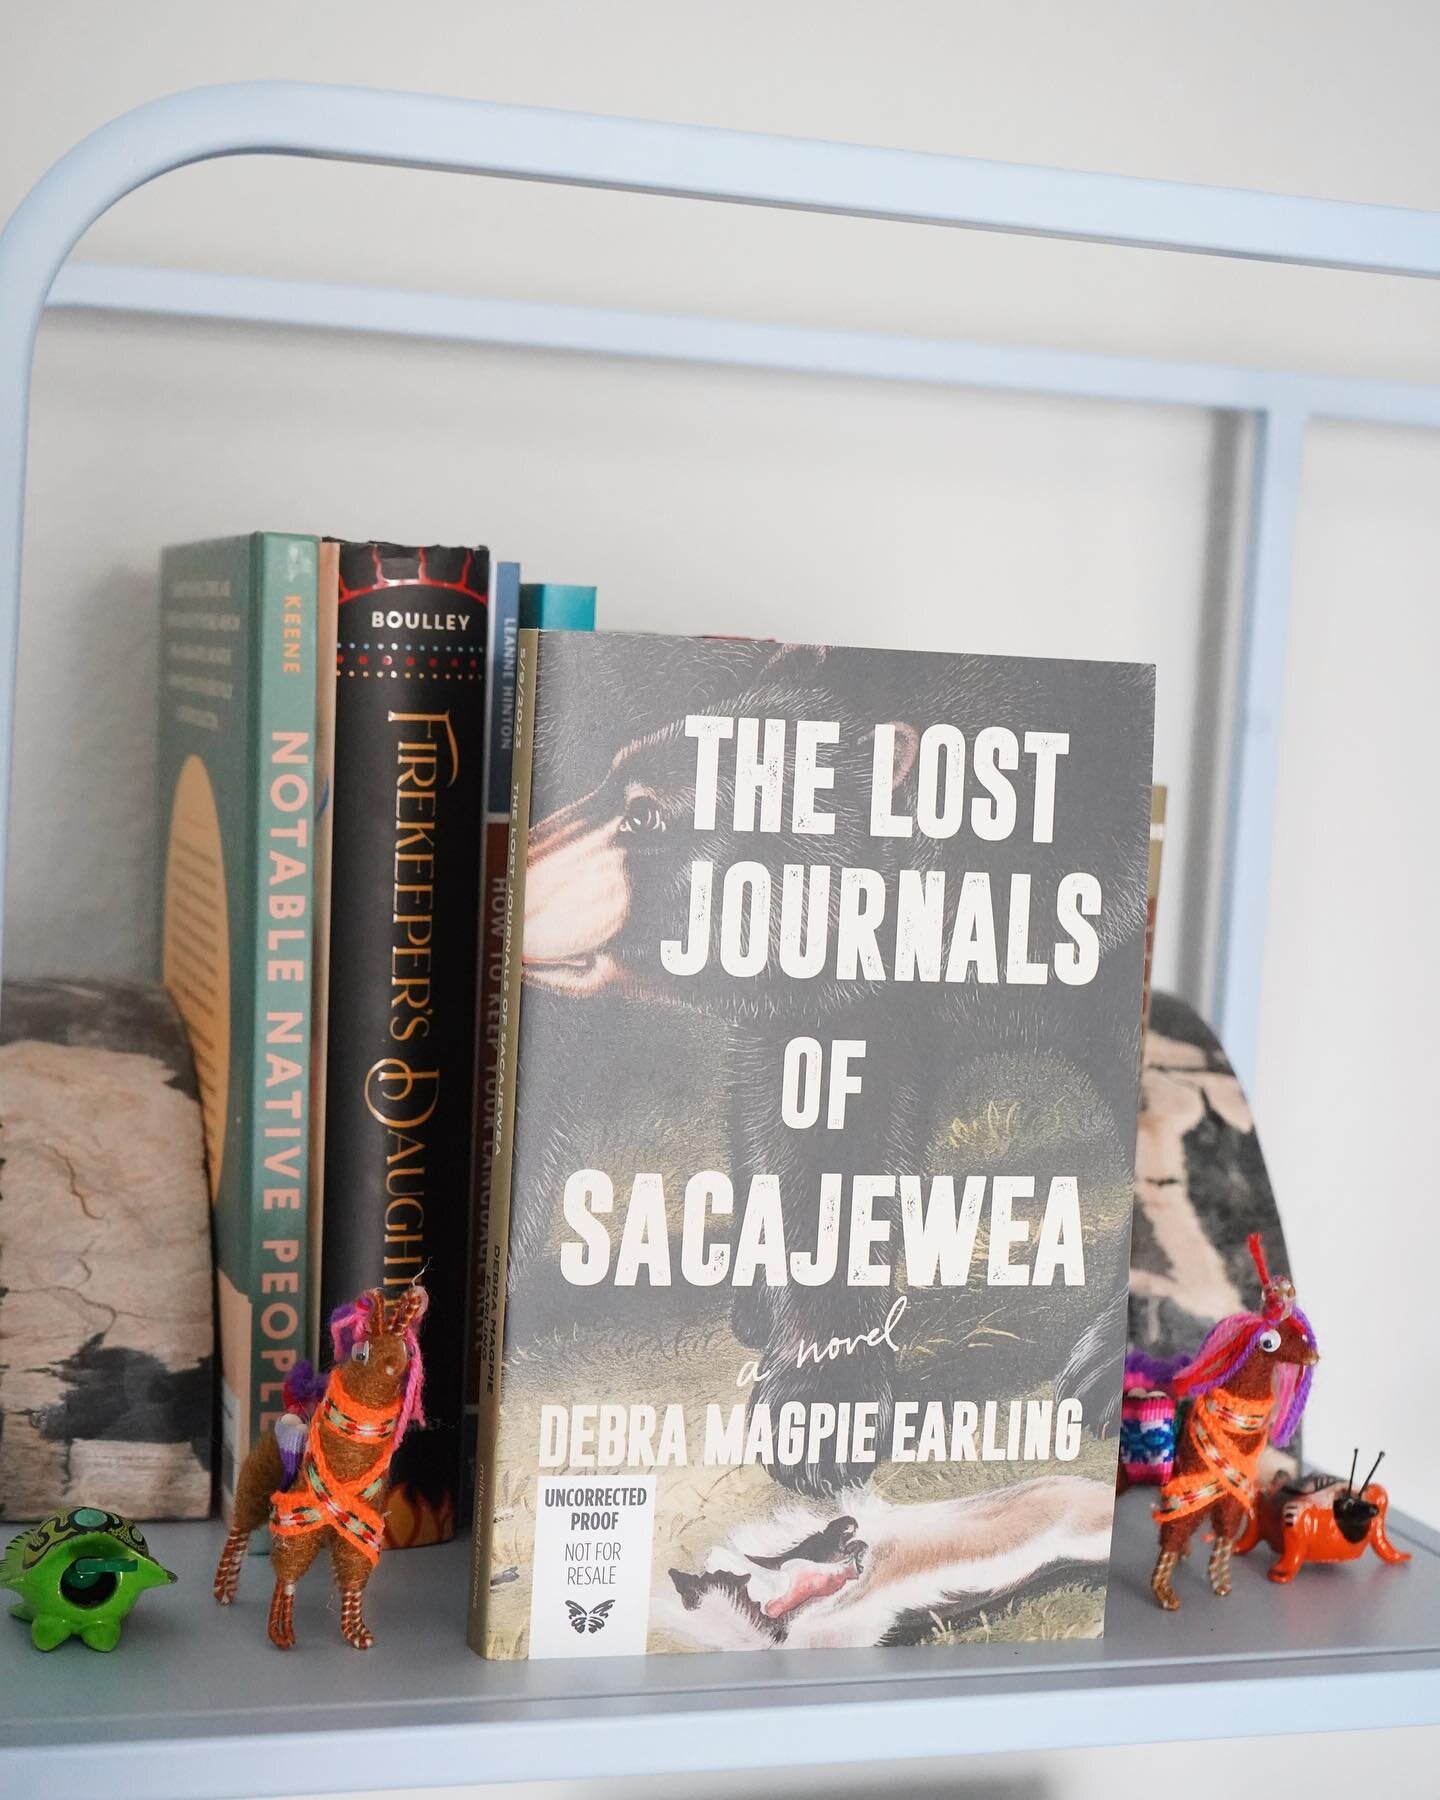 📖✨📬 NEW ARC: The Lost Journals of Sacajewea by Debra Magpie Earling via @milkweed_books 

after devouring Earling&rsquo;s Perma Red over the summer on my trip to New Mexico i am sooo grateful to have her new ARC coming May 2023 🤩 

i built a brand